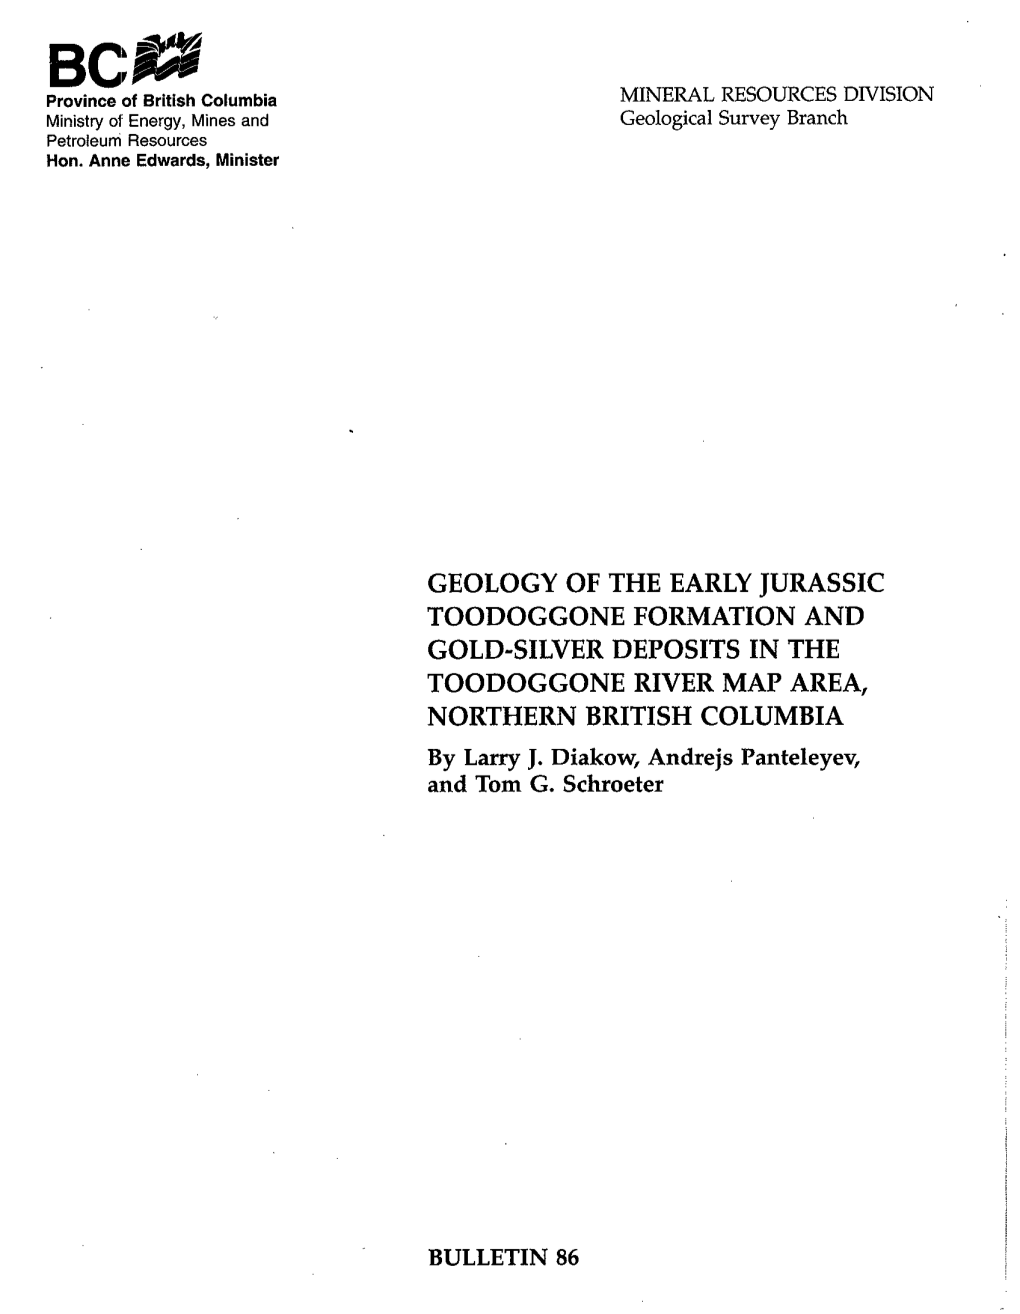 GEOLOGY of the EARLY JURASSIC TOODOGGONE FORMATION and GOLD-SILVER DEPOSITS in the TOODOGGONE RIVER MAP AREA, NORTHERN BRITISH COLUMBIA by Larry J